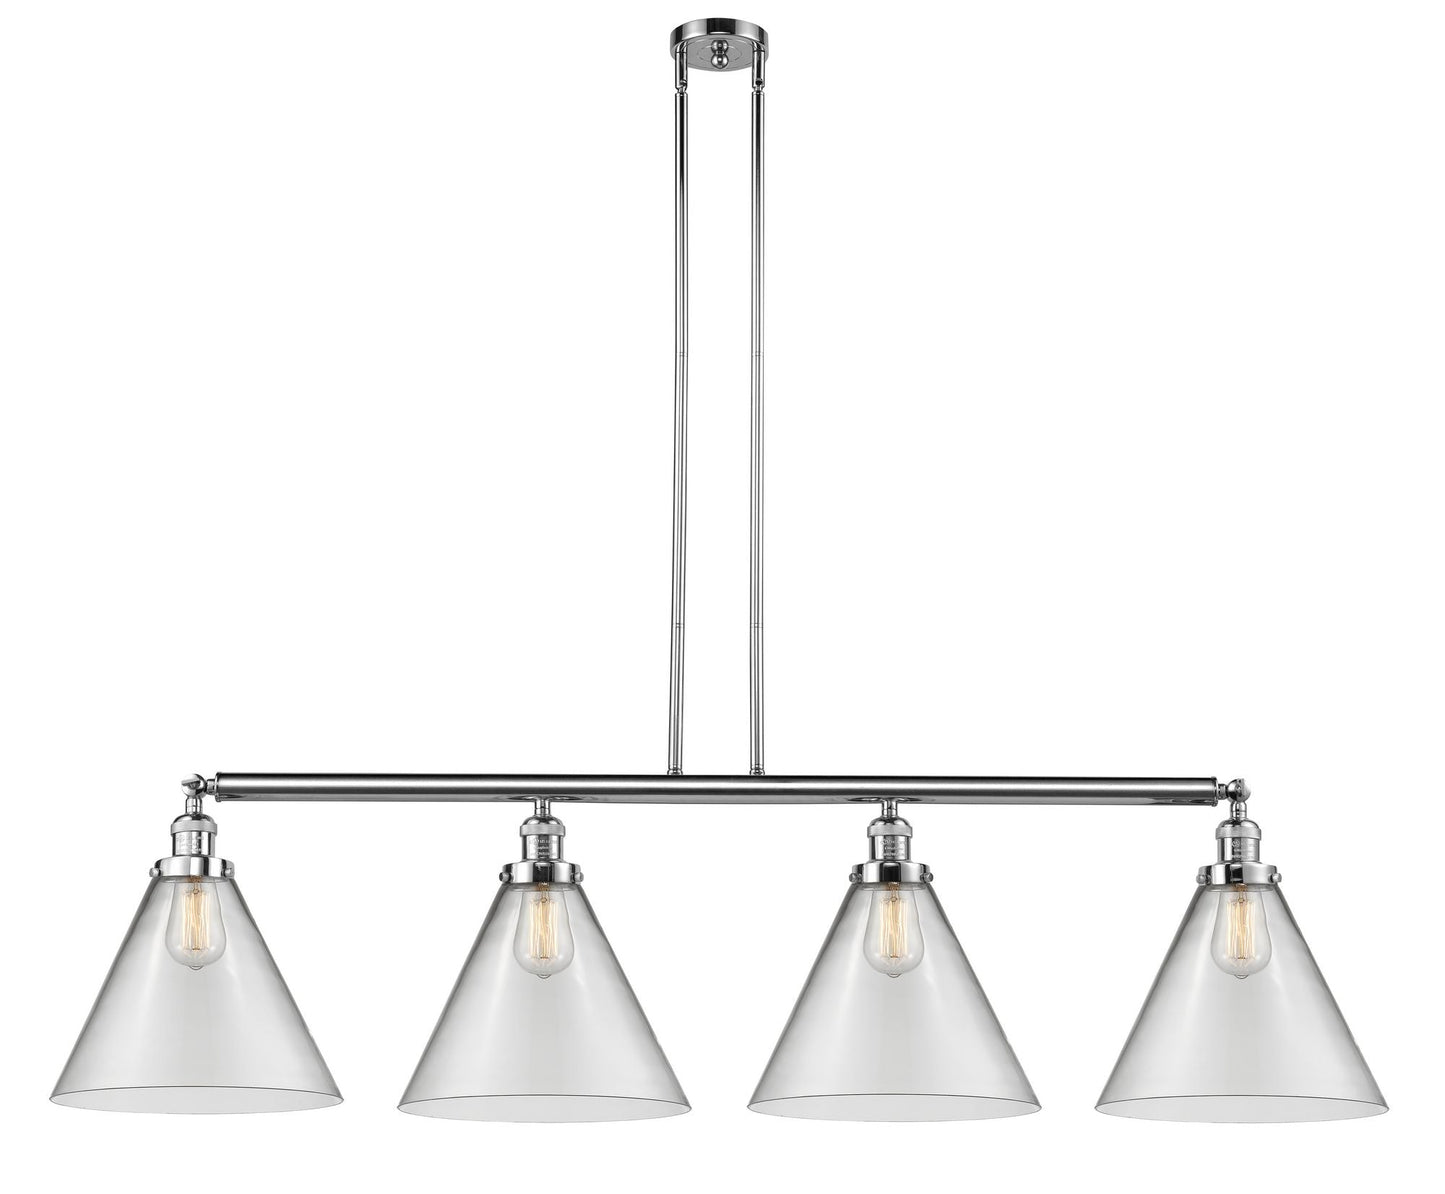 214-PC-G42-L 4-Light 56" Polished Chrome Island Light - Clear Cone 12" Glass - LED Bulb - Dimmensions: 56 x 12 x 14<br>Minimum Height : 24.25<br>Maximum Height : 48.25 - Sloped Ceiling Compatible: Yes